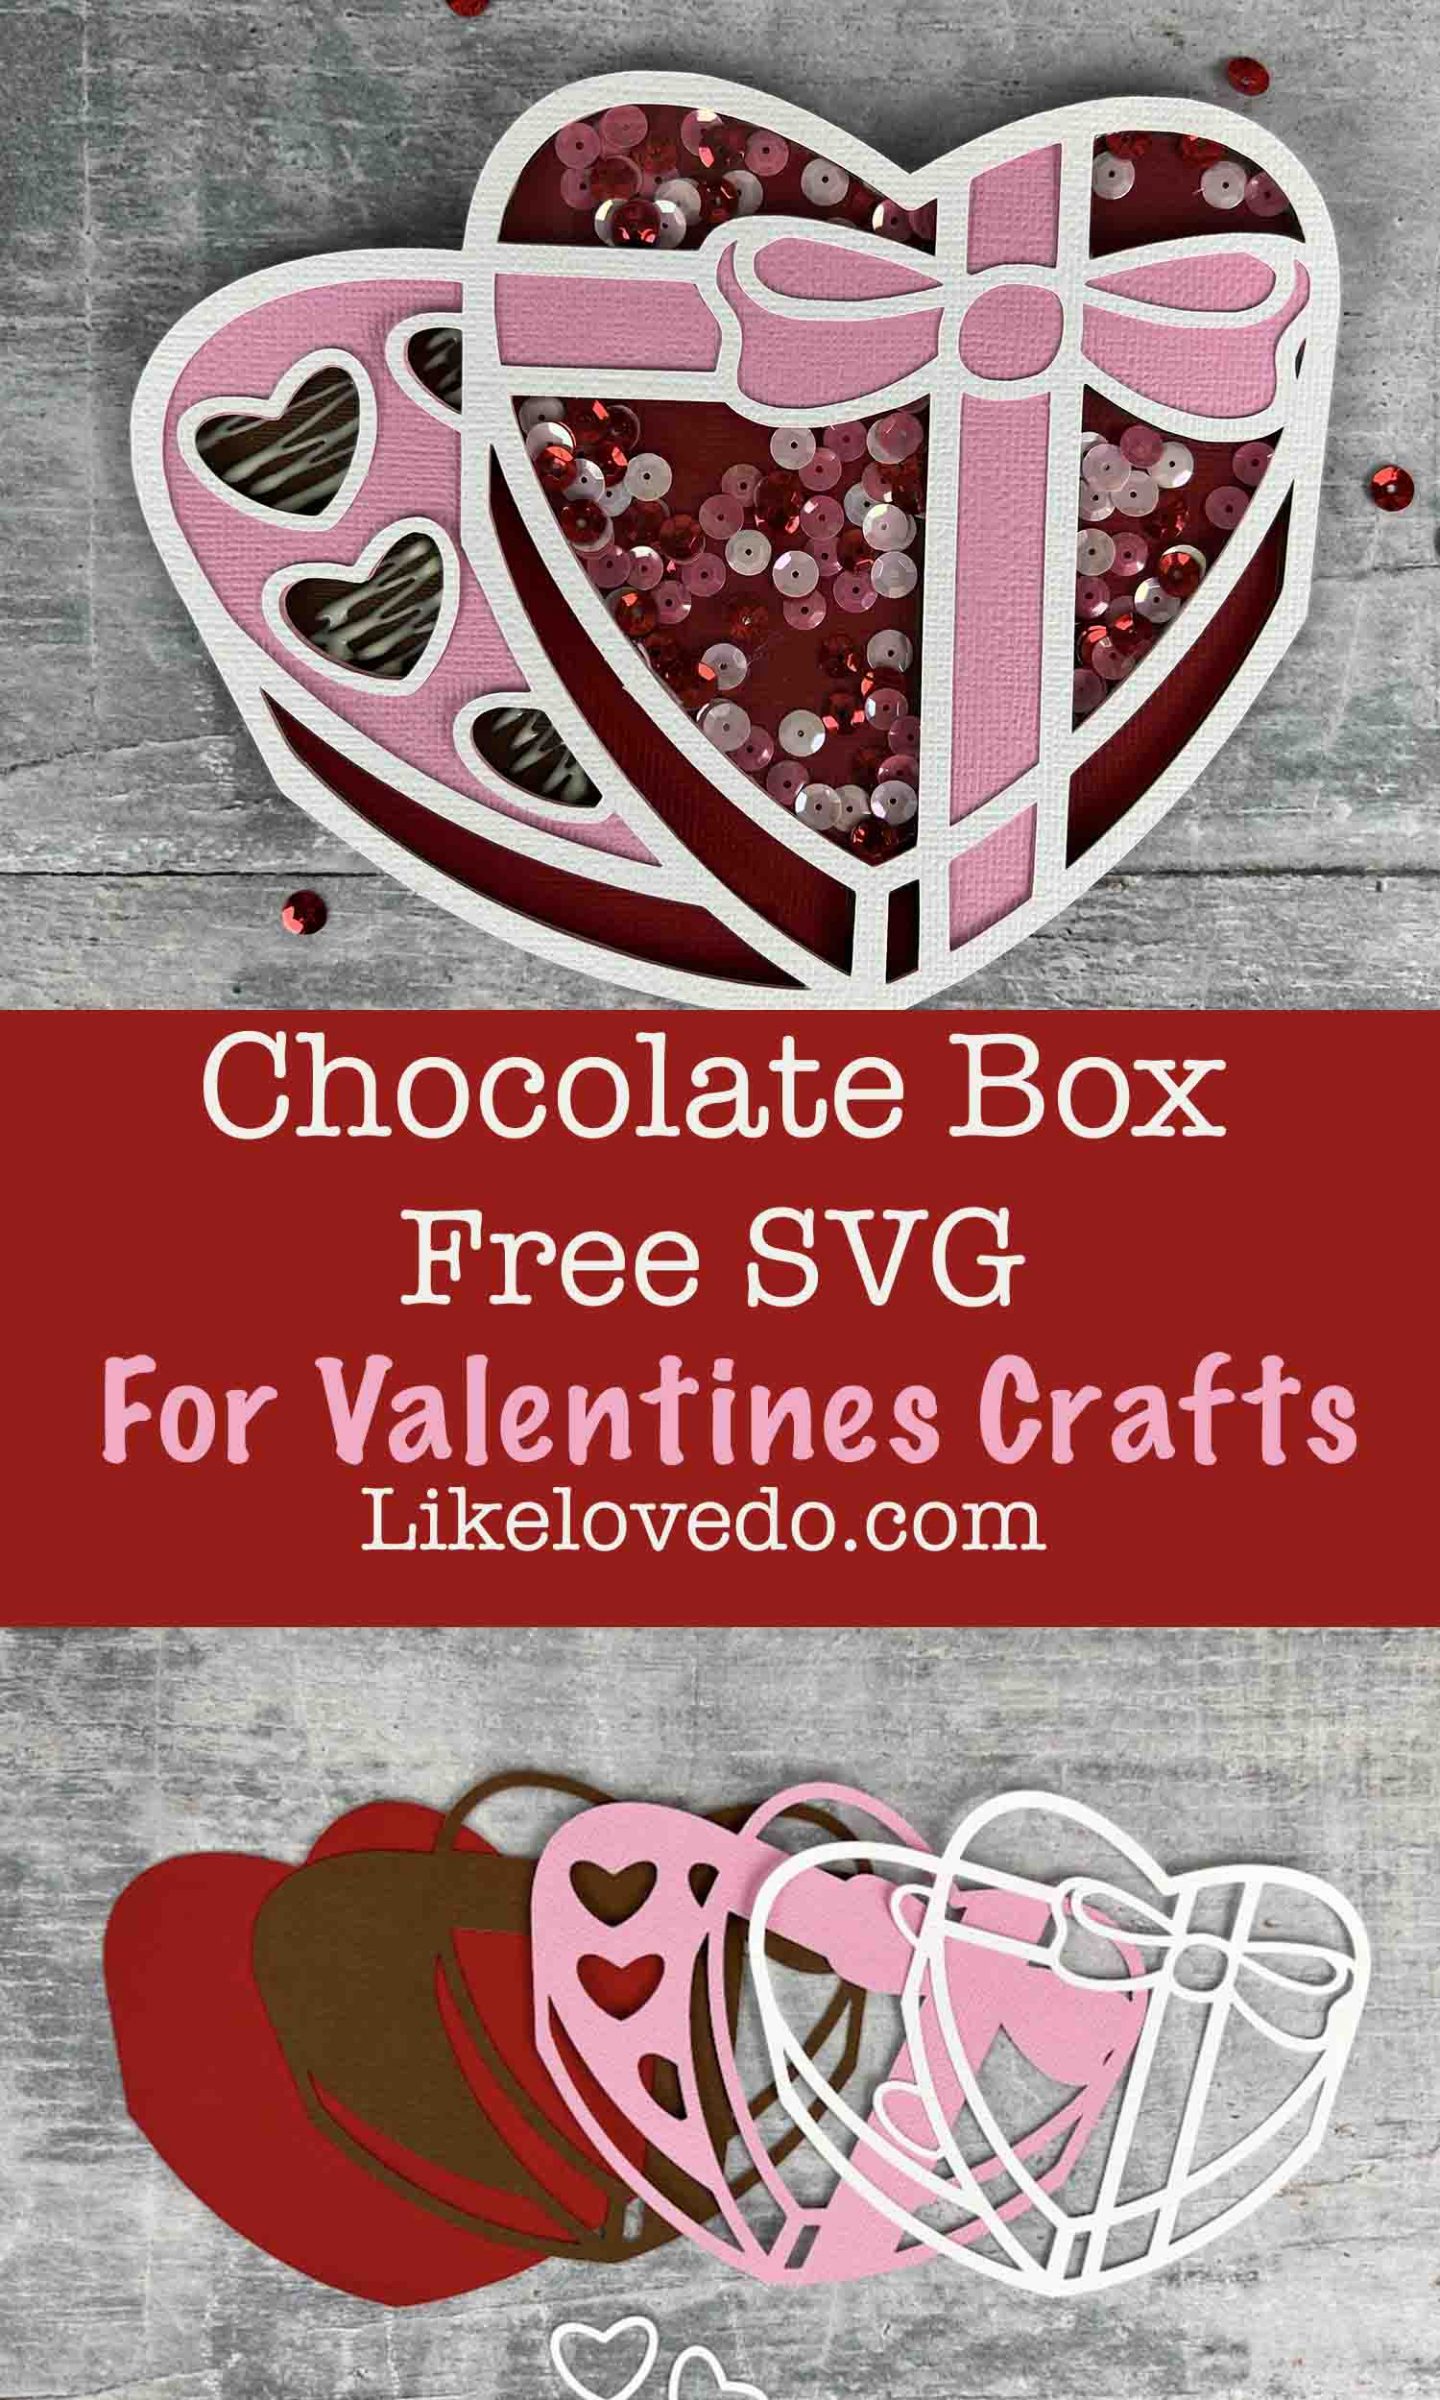 Free Layered Box of chocolates SVG Valentines cut file for Silhouette or Cricut